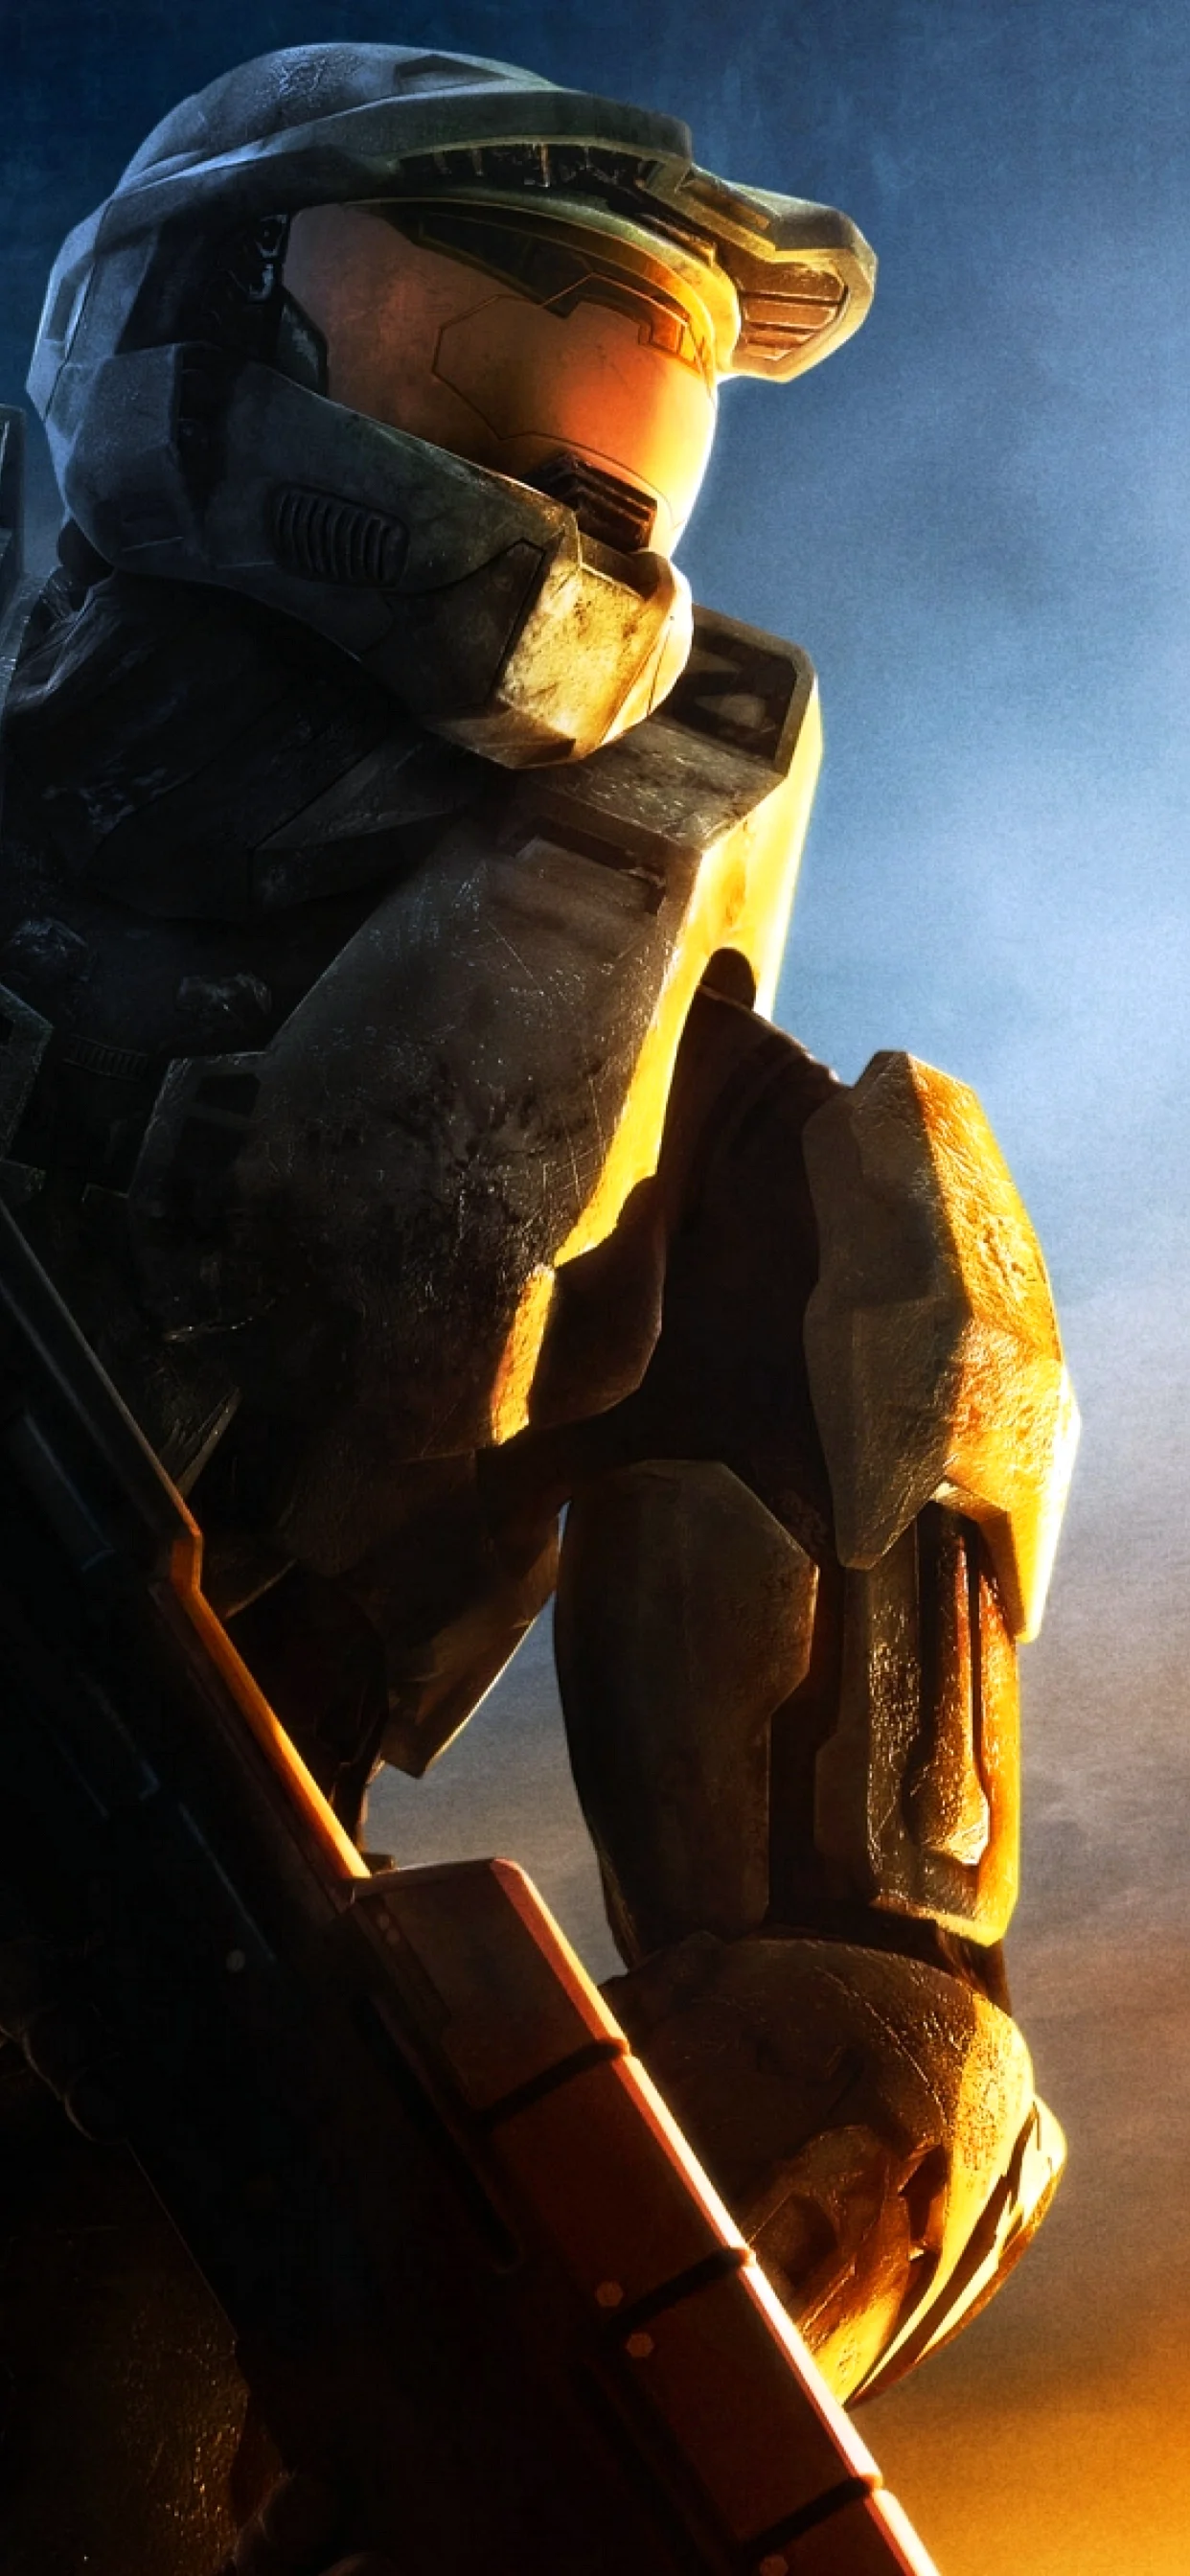 Halo Game Wallpaper for iPhone 11 Pro Max